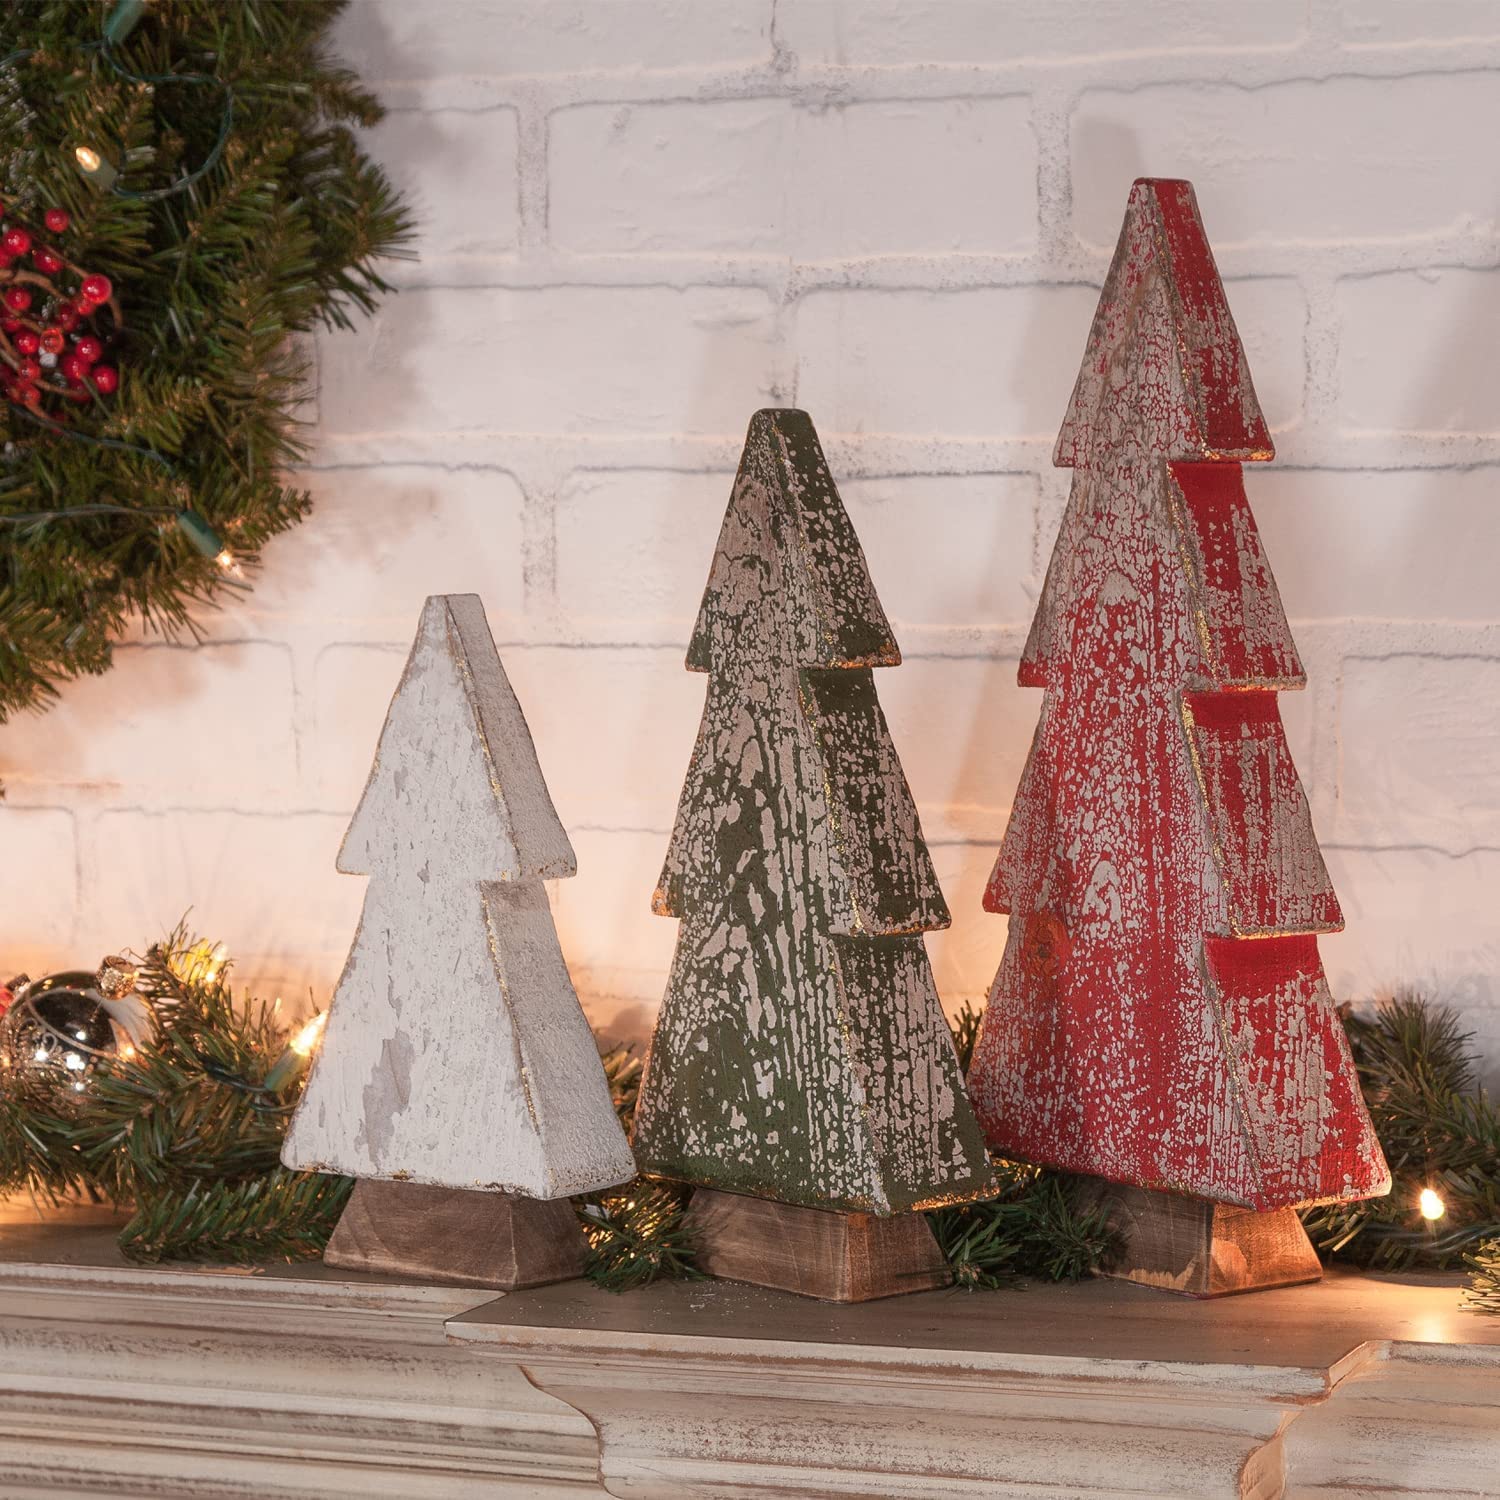 Rustic Wooden Christmas Trees: Festive Holiday and Christmas Tree Decor